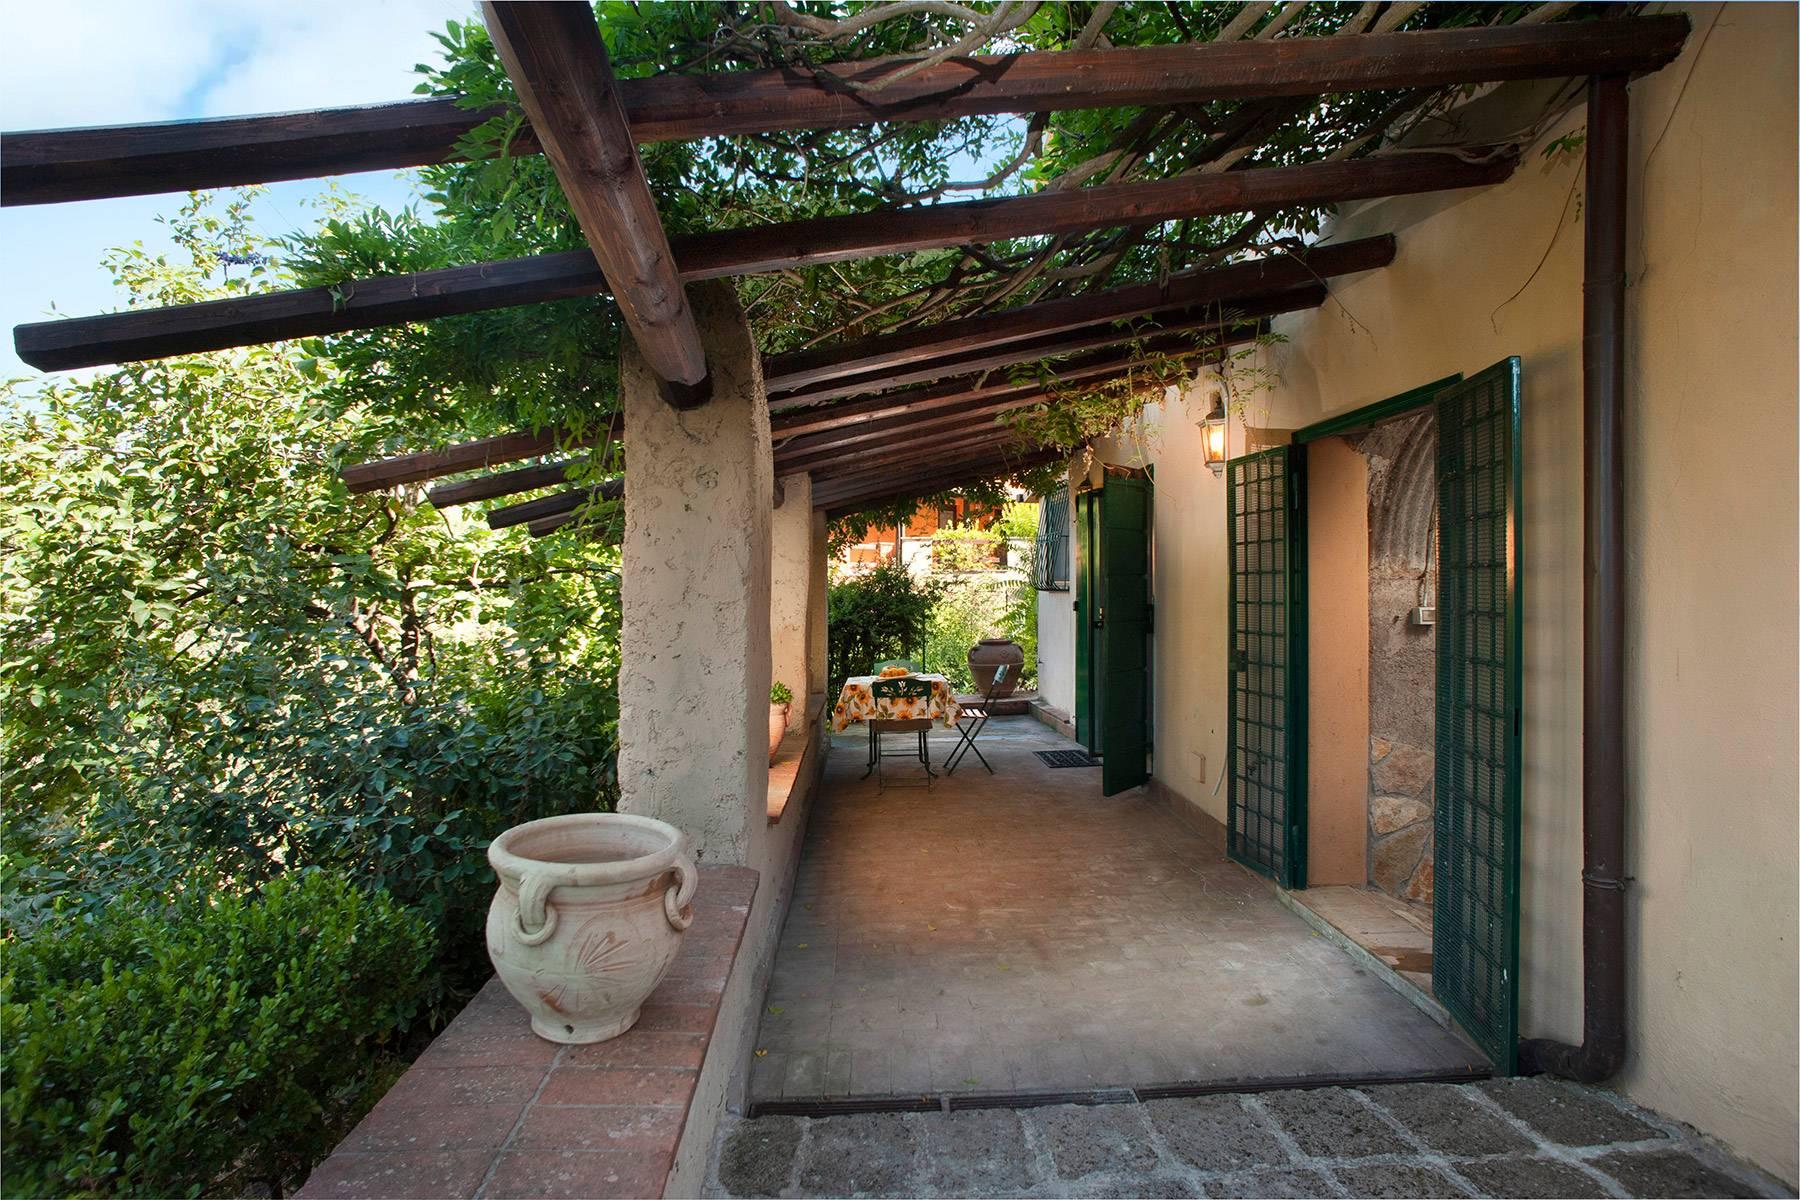 Villa Nayara - Lovely mansion with swimming pool 30 minutes from Rome - 64